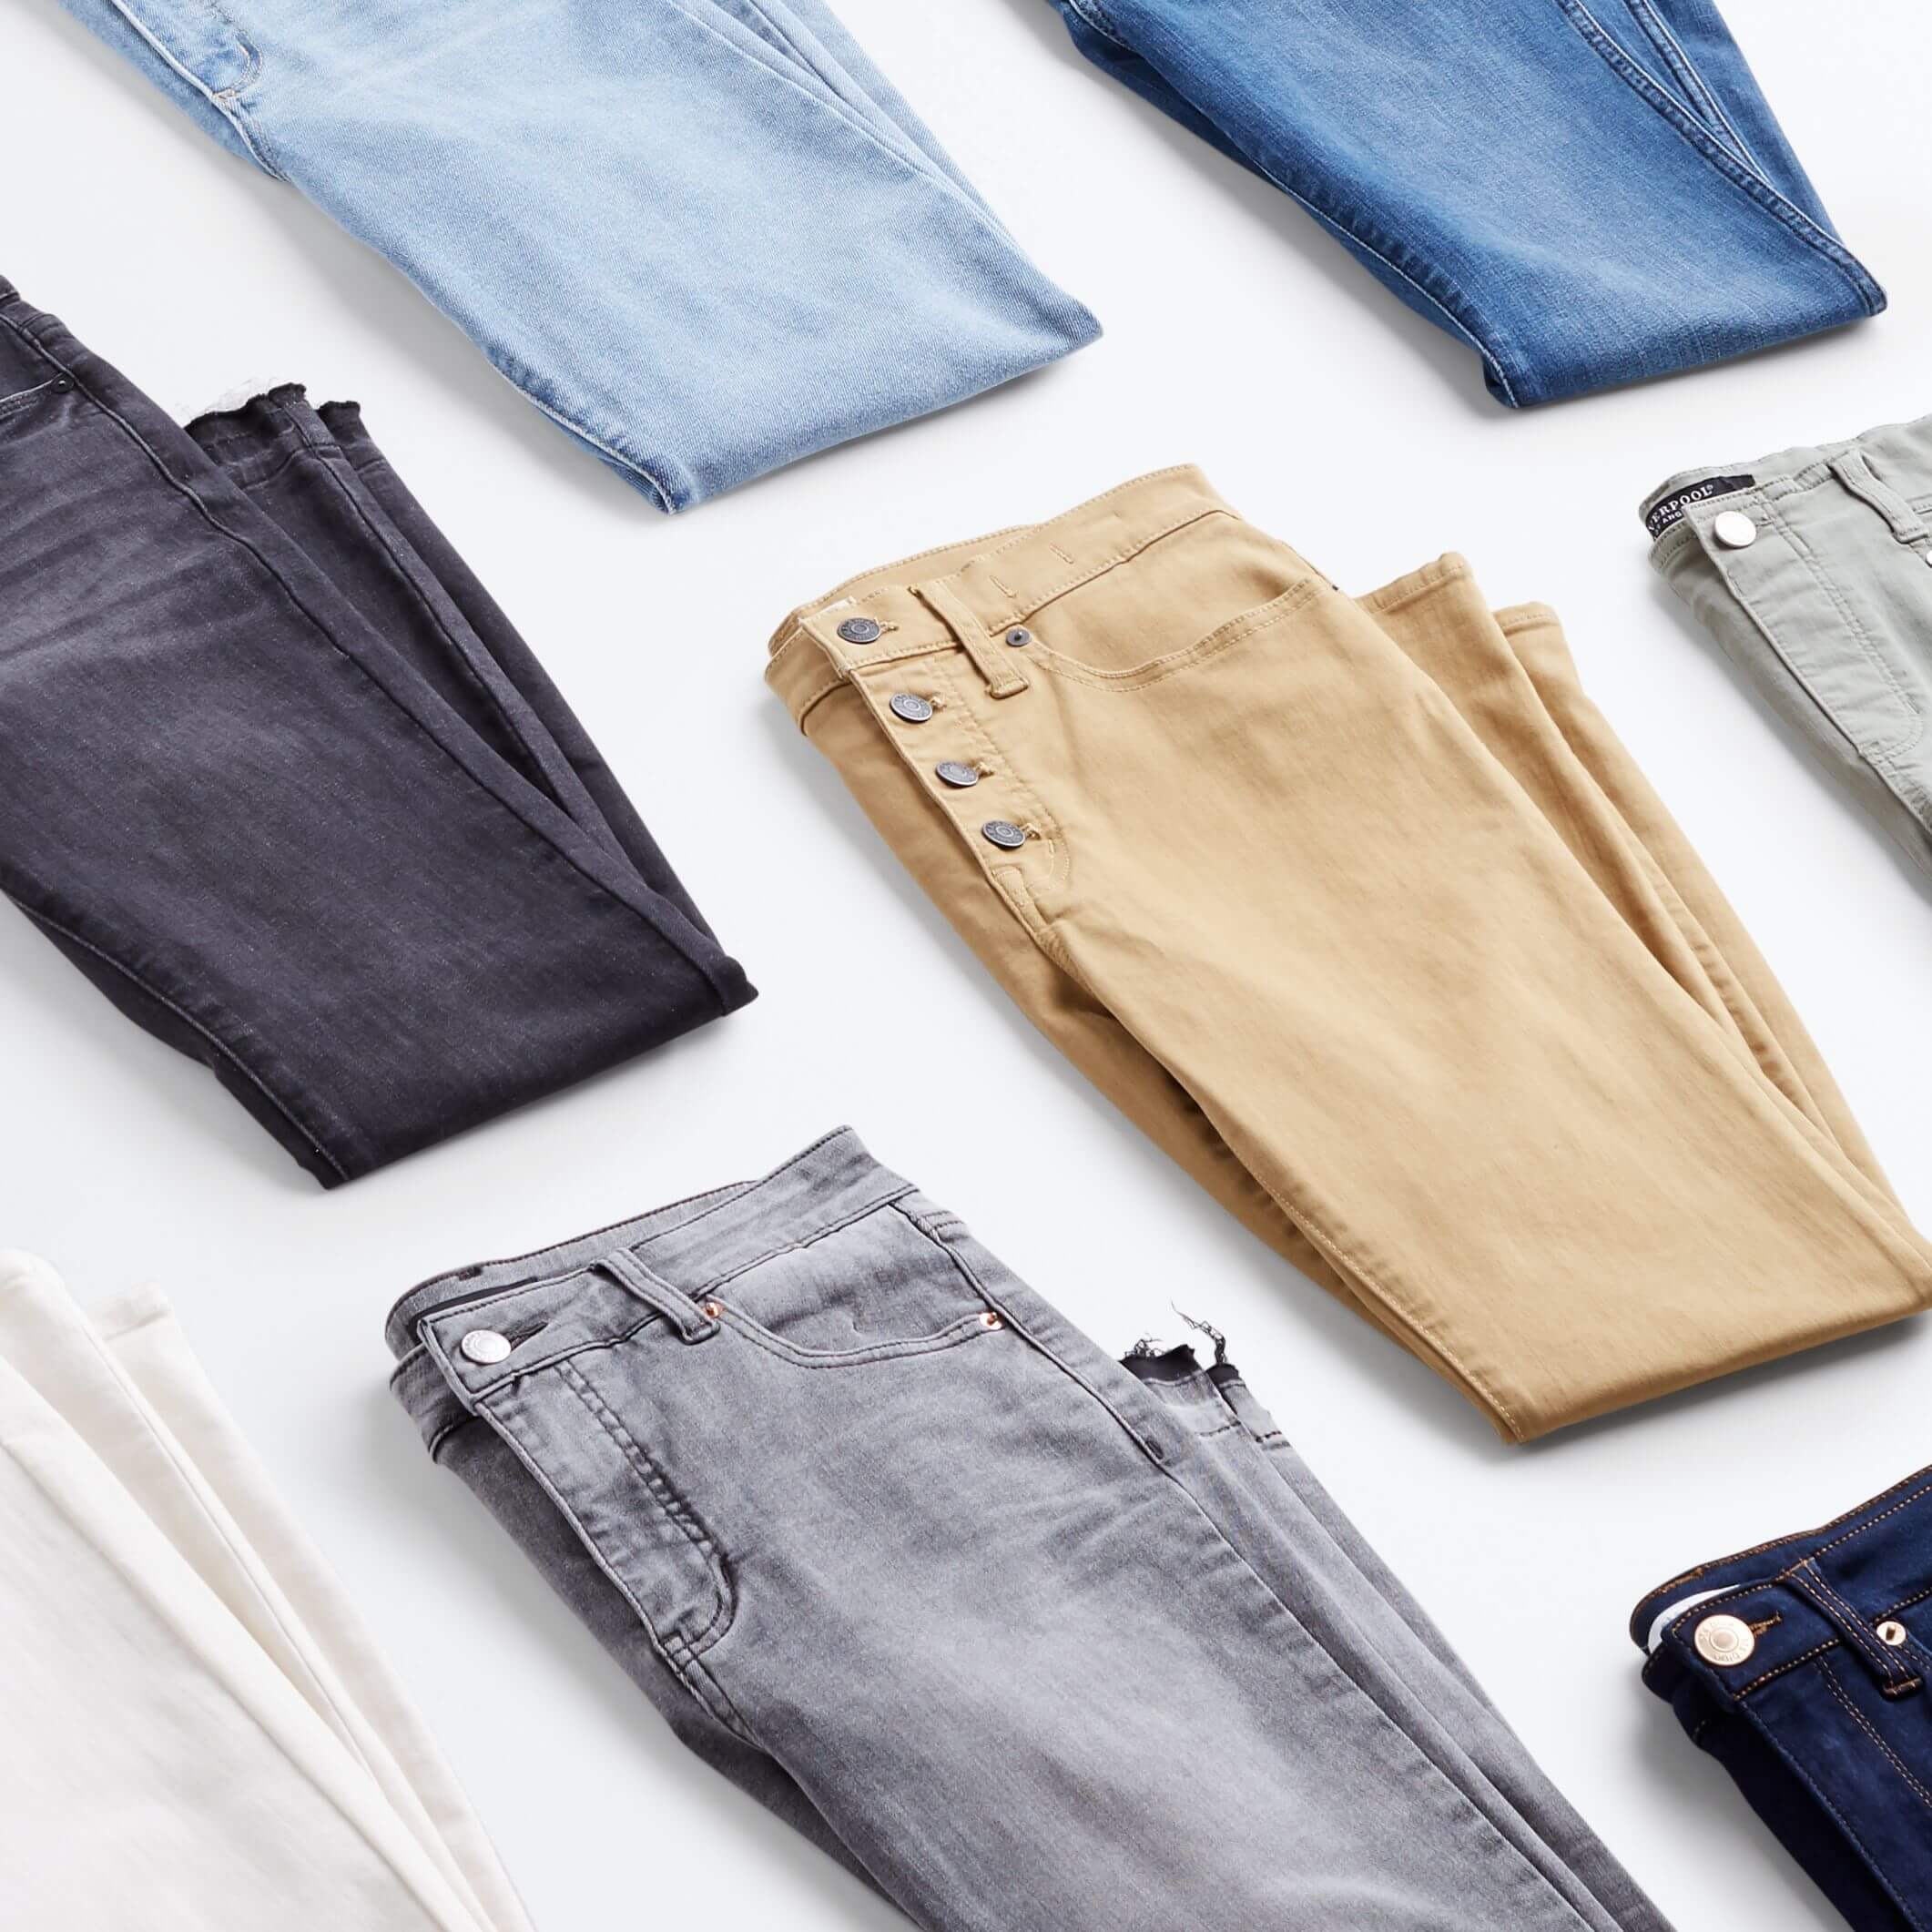 Denim Tips: How to Wash, Break In, and Fold Jeans